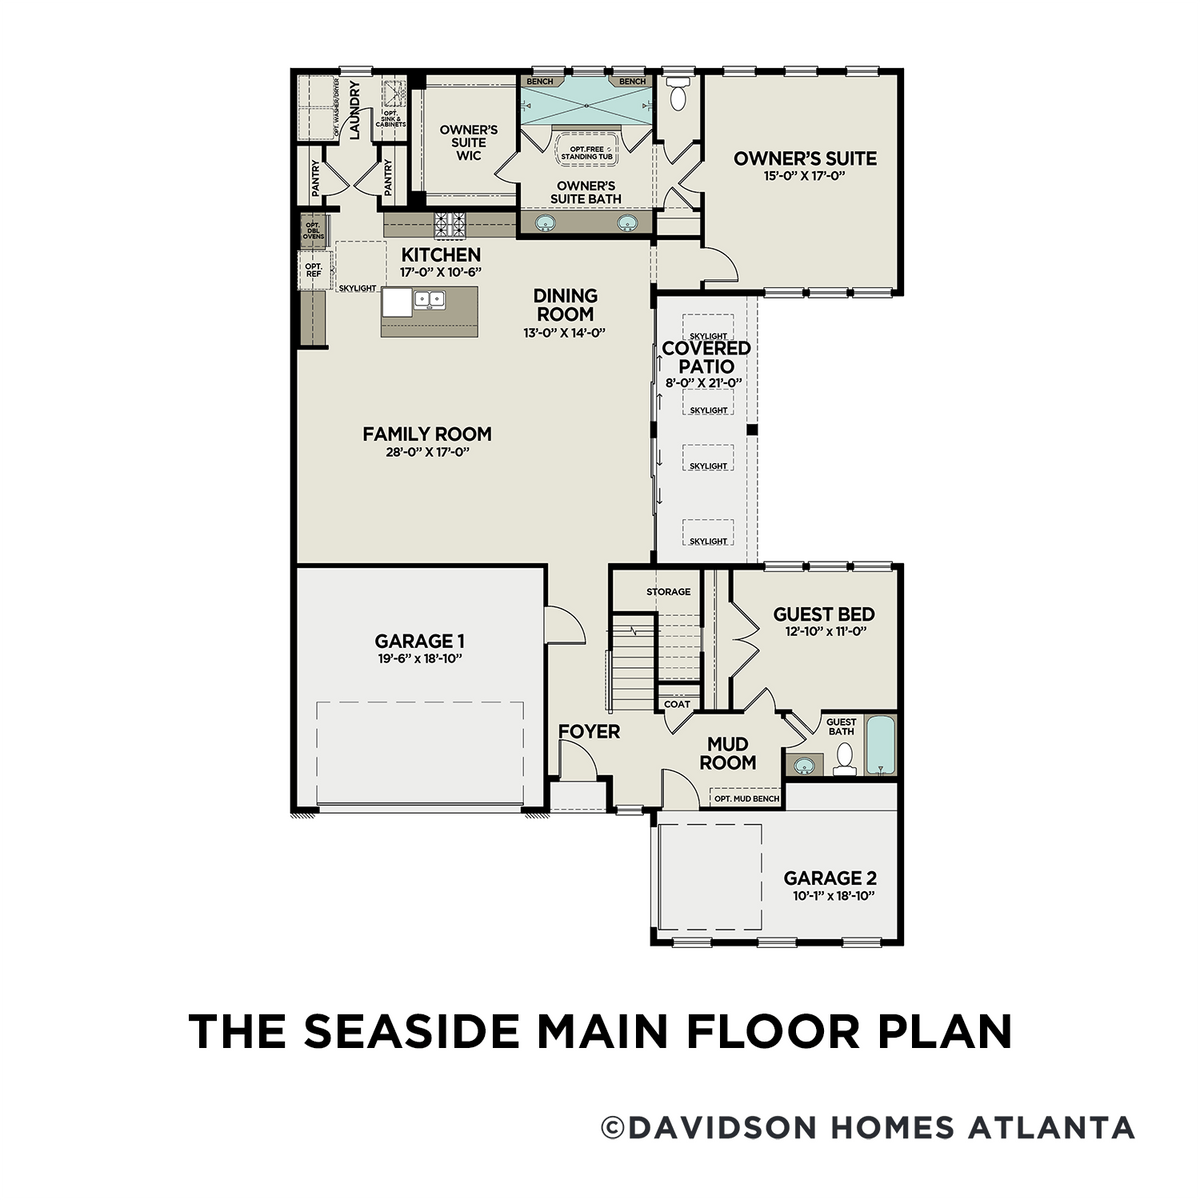 1 - The Seaside B floor plan layout for 320 Gray Shingle Lane in Davidson Homes' The Village at Towne Lake community.